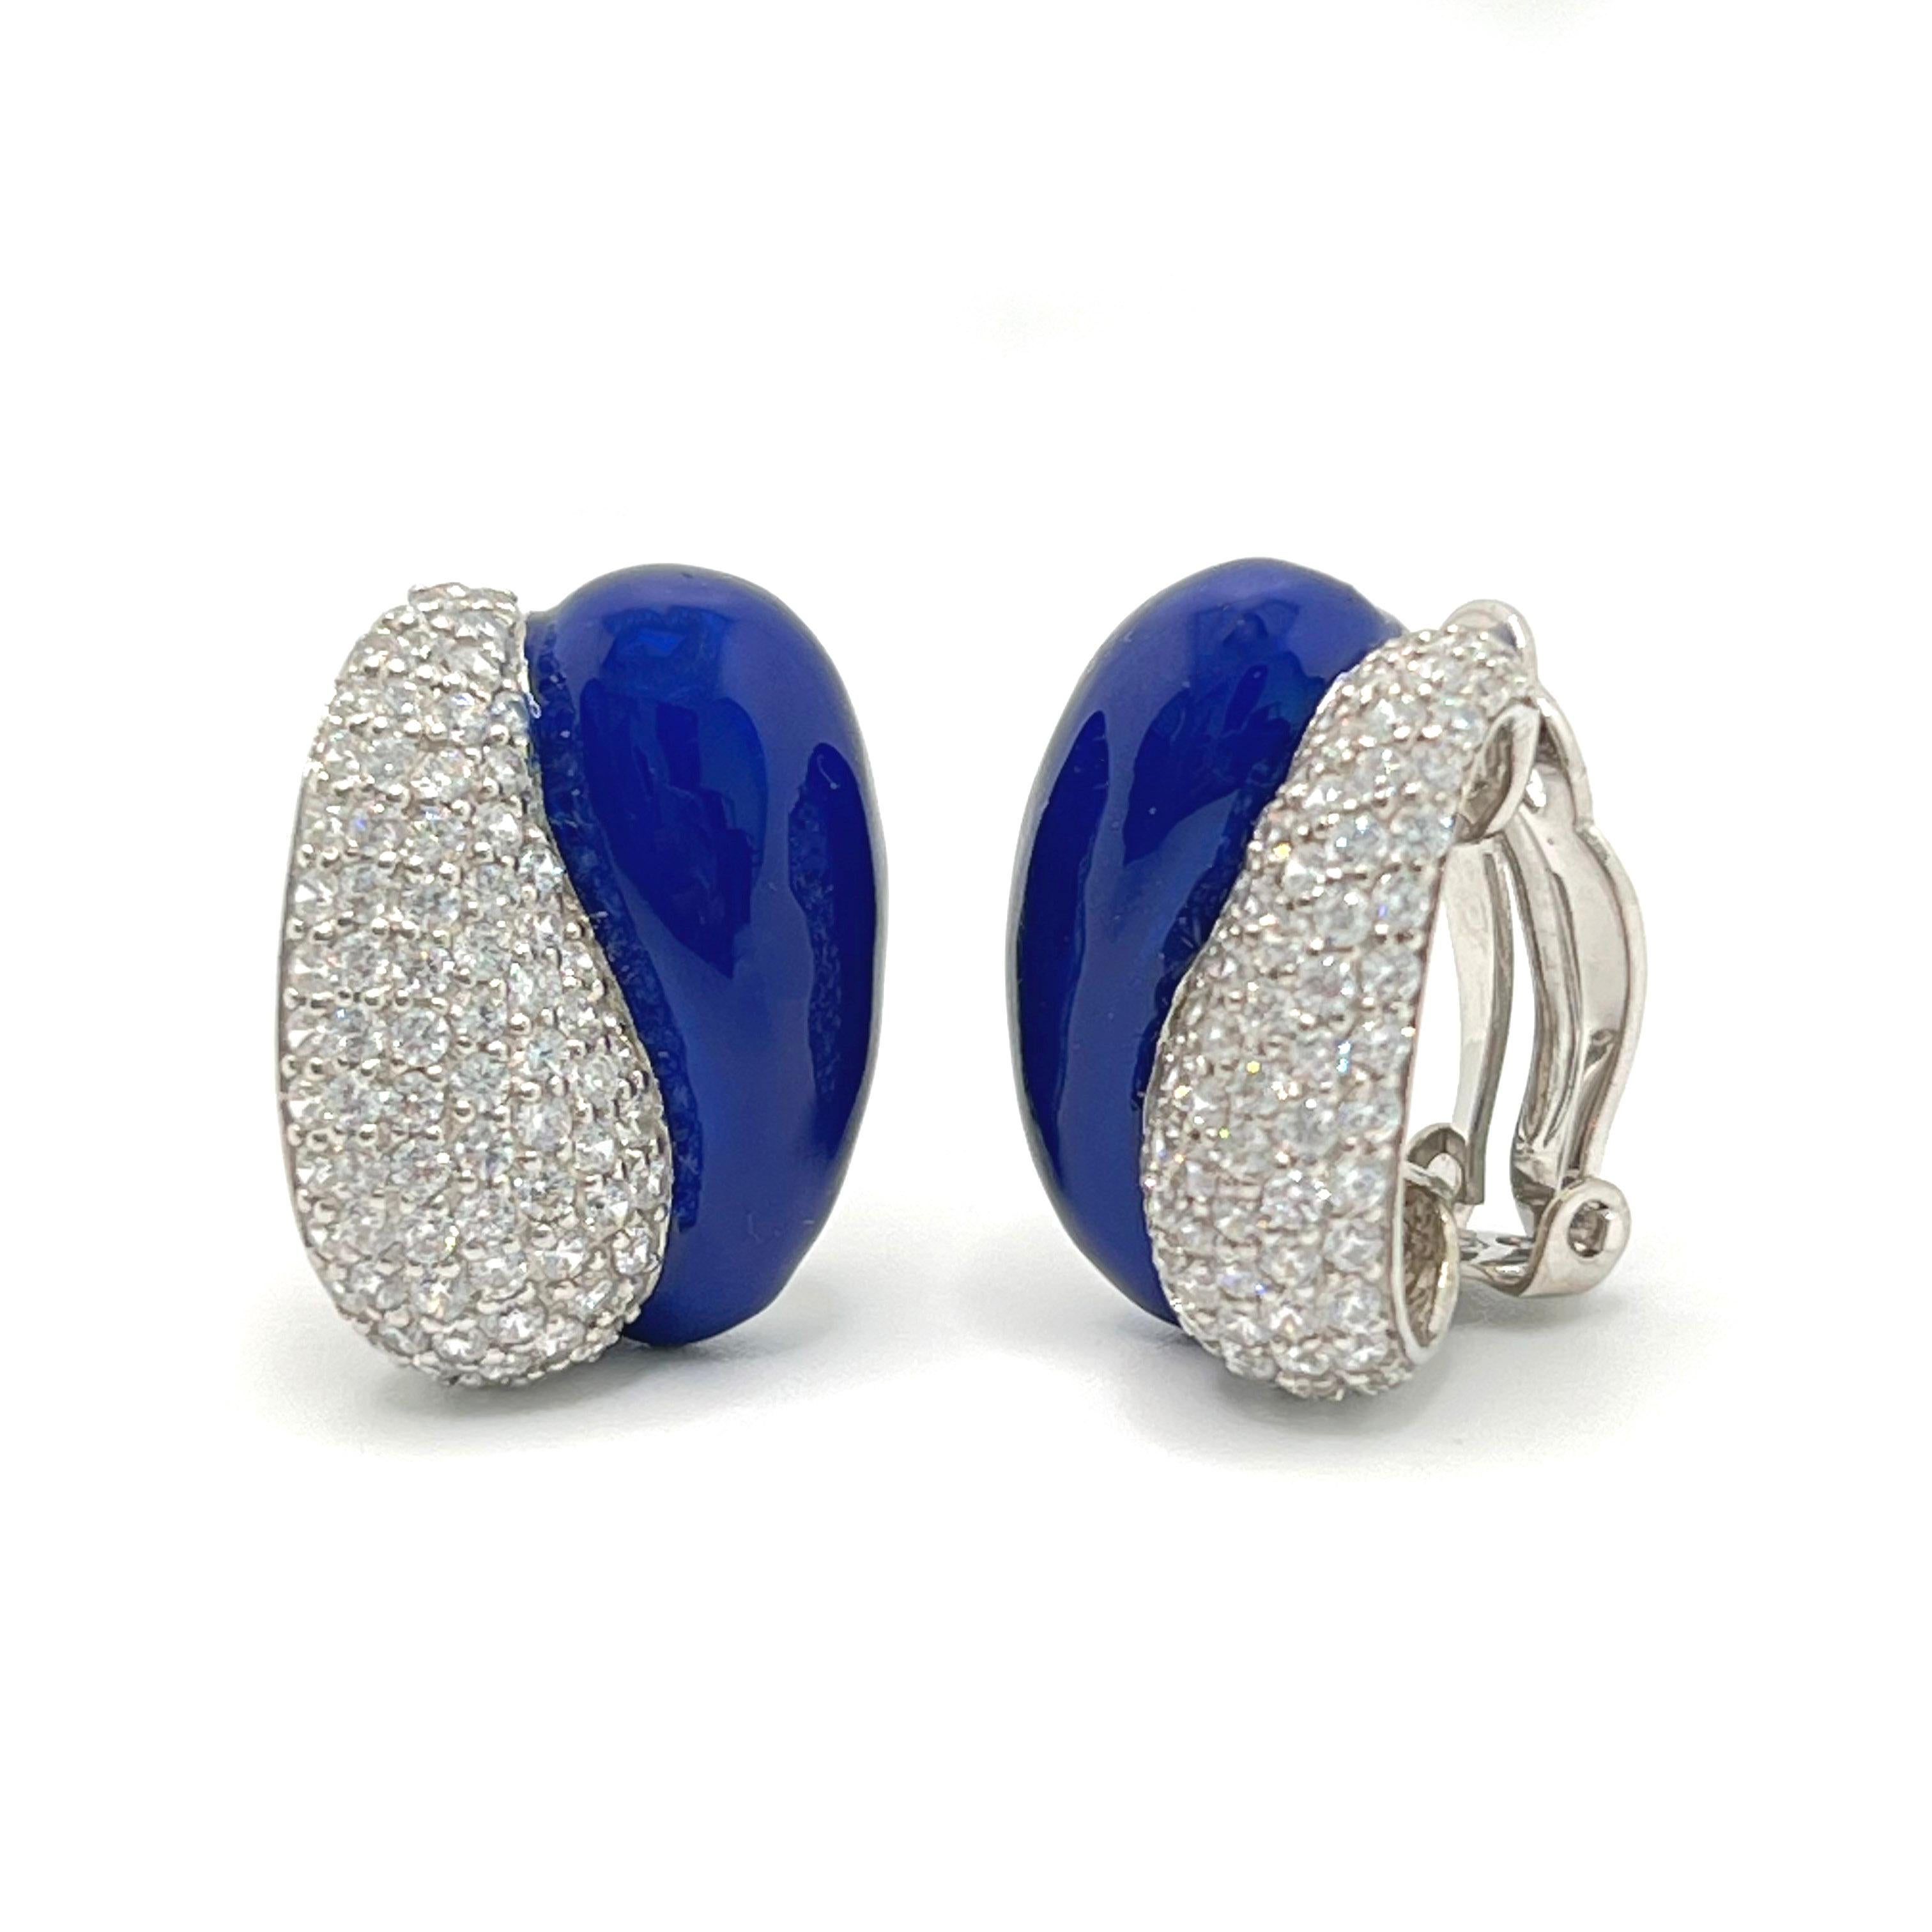 Sophisticated Half Royal Blue Enamel Half Pave Sterling Silver Clip-on Earrings In New Condition For Sale In Los Angeles, CA